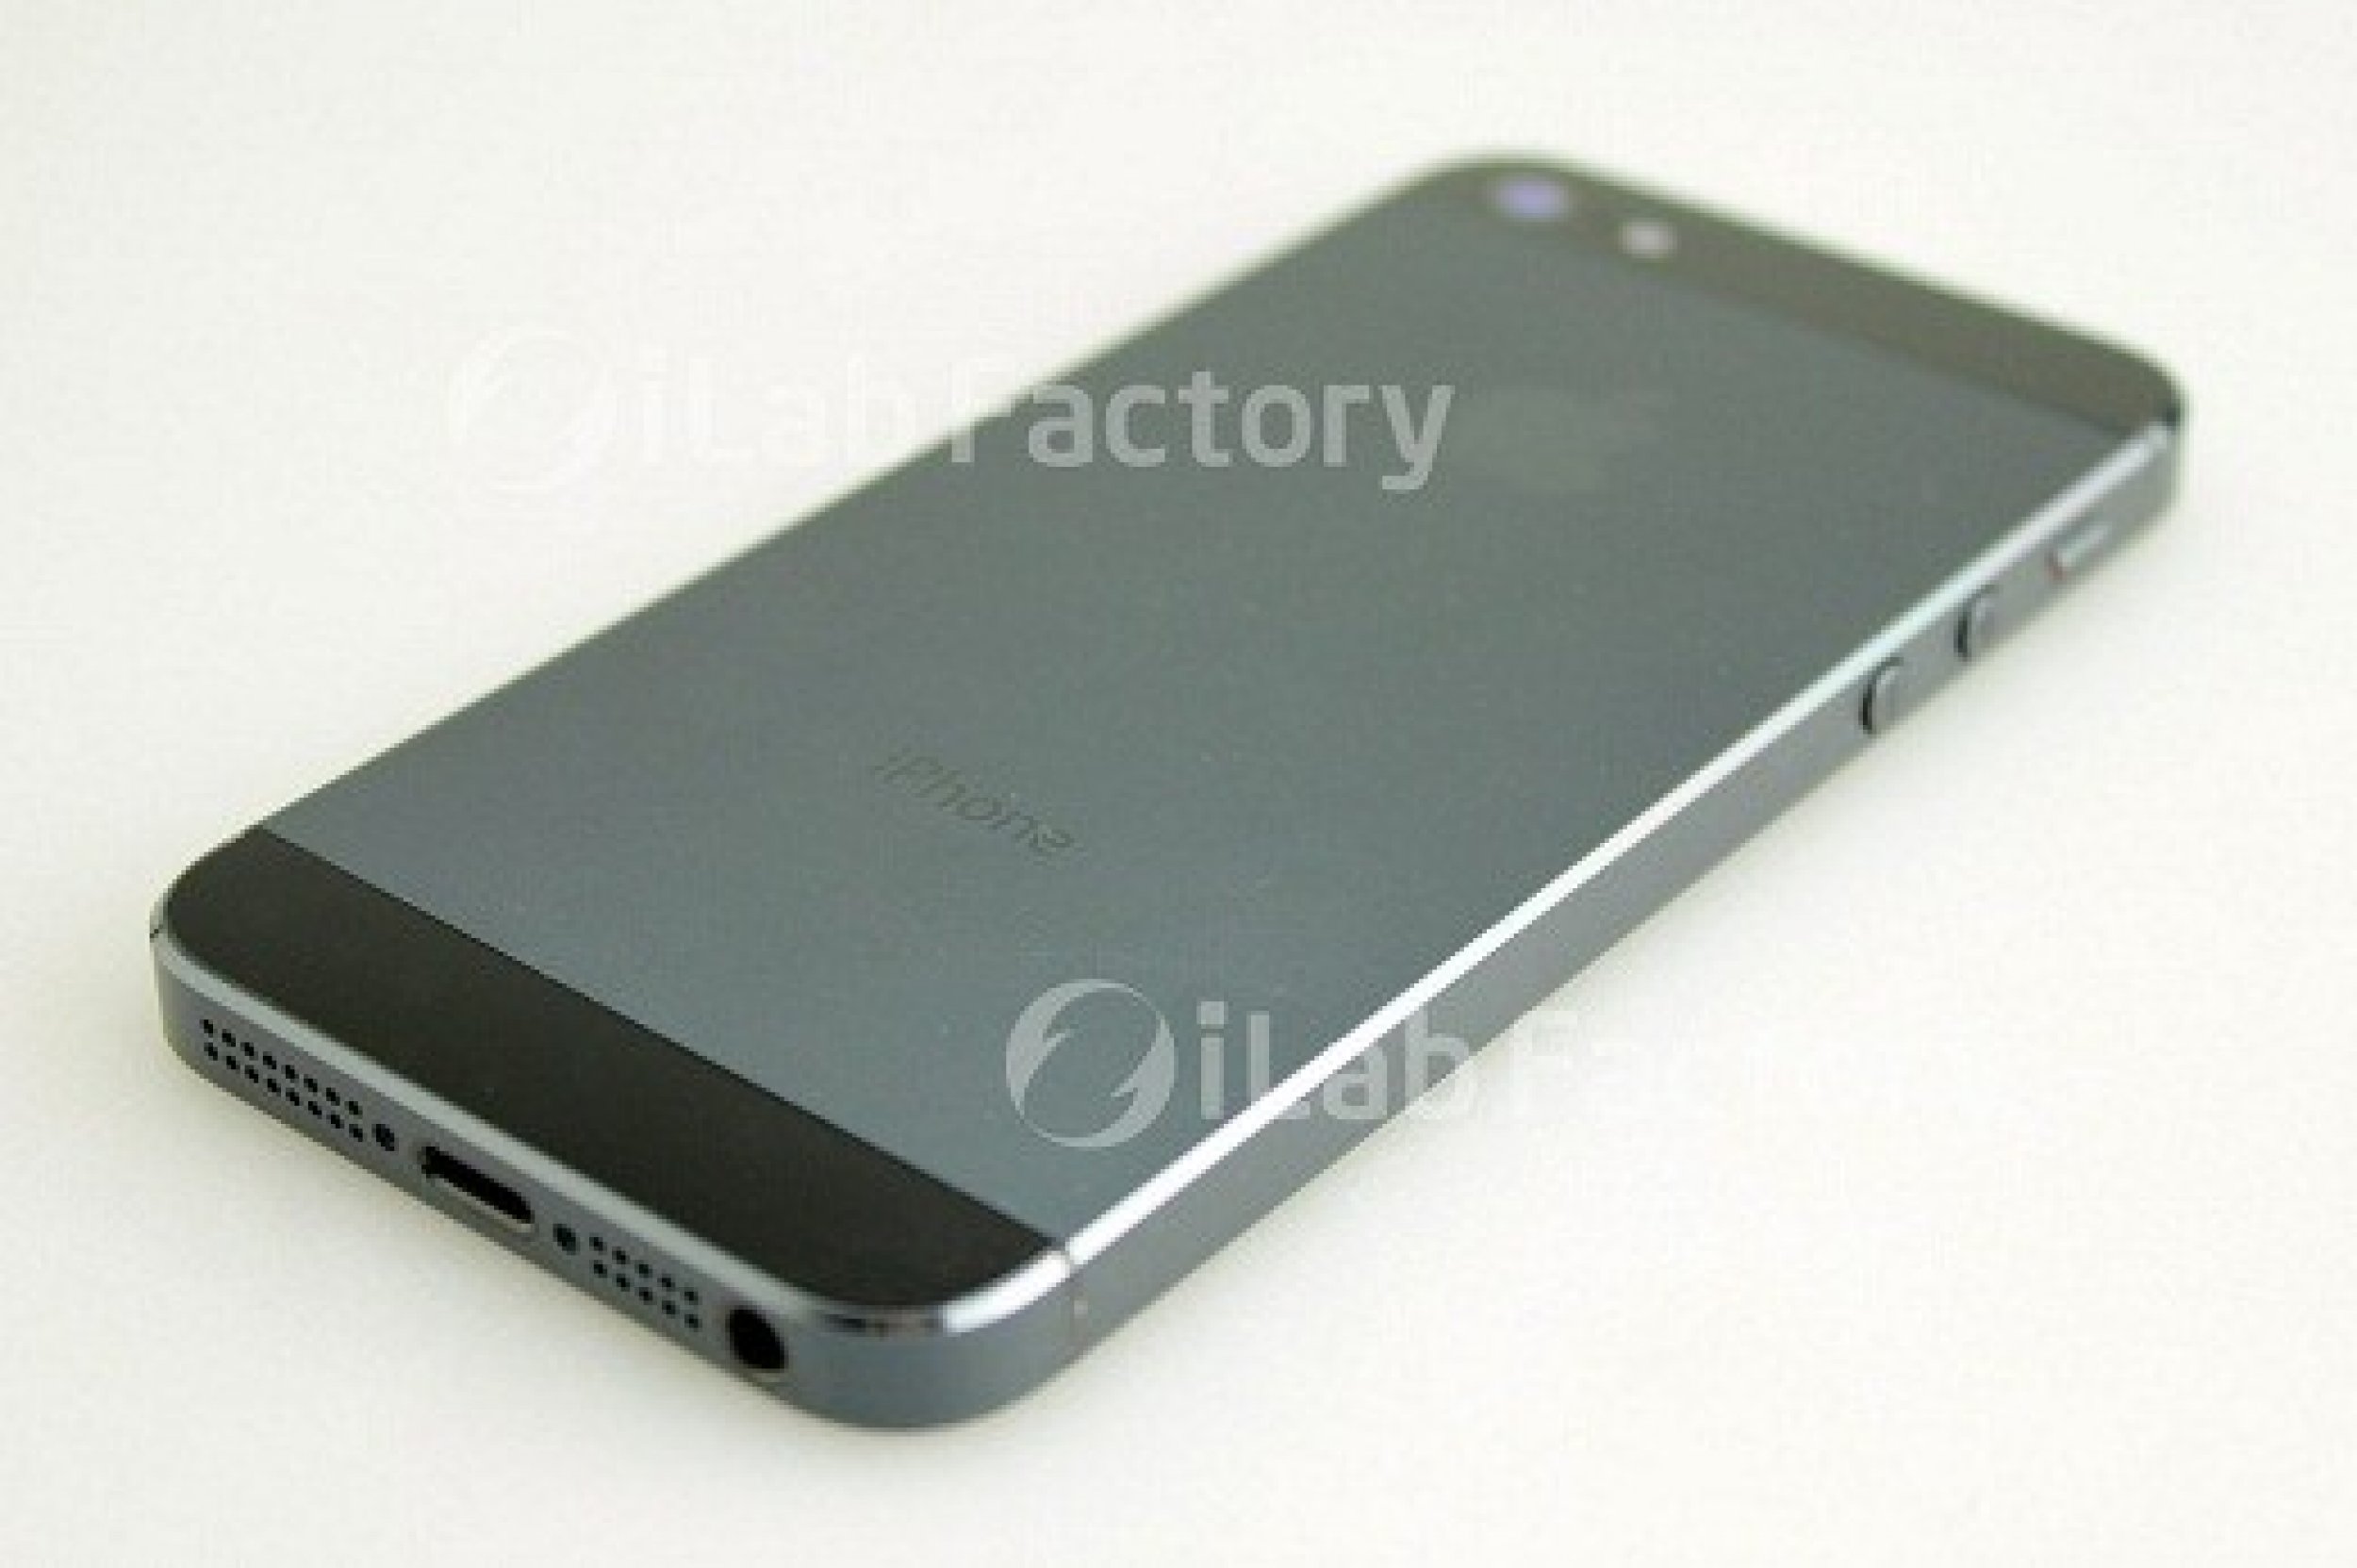 Apple iPhone 5 Rumors 800 Starting Price Fat Chance PICTURES